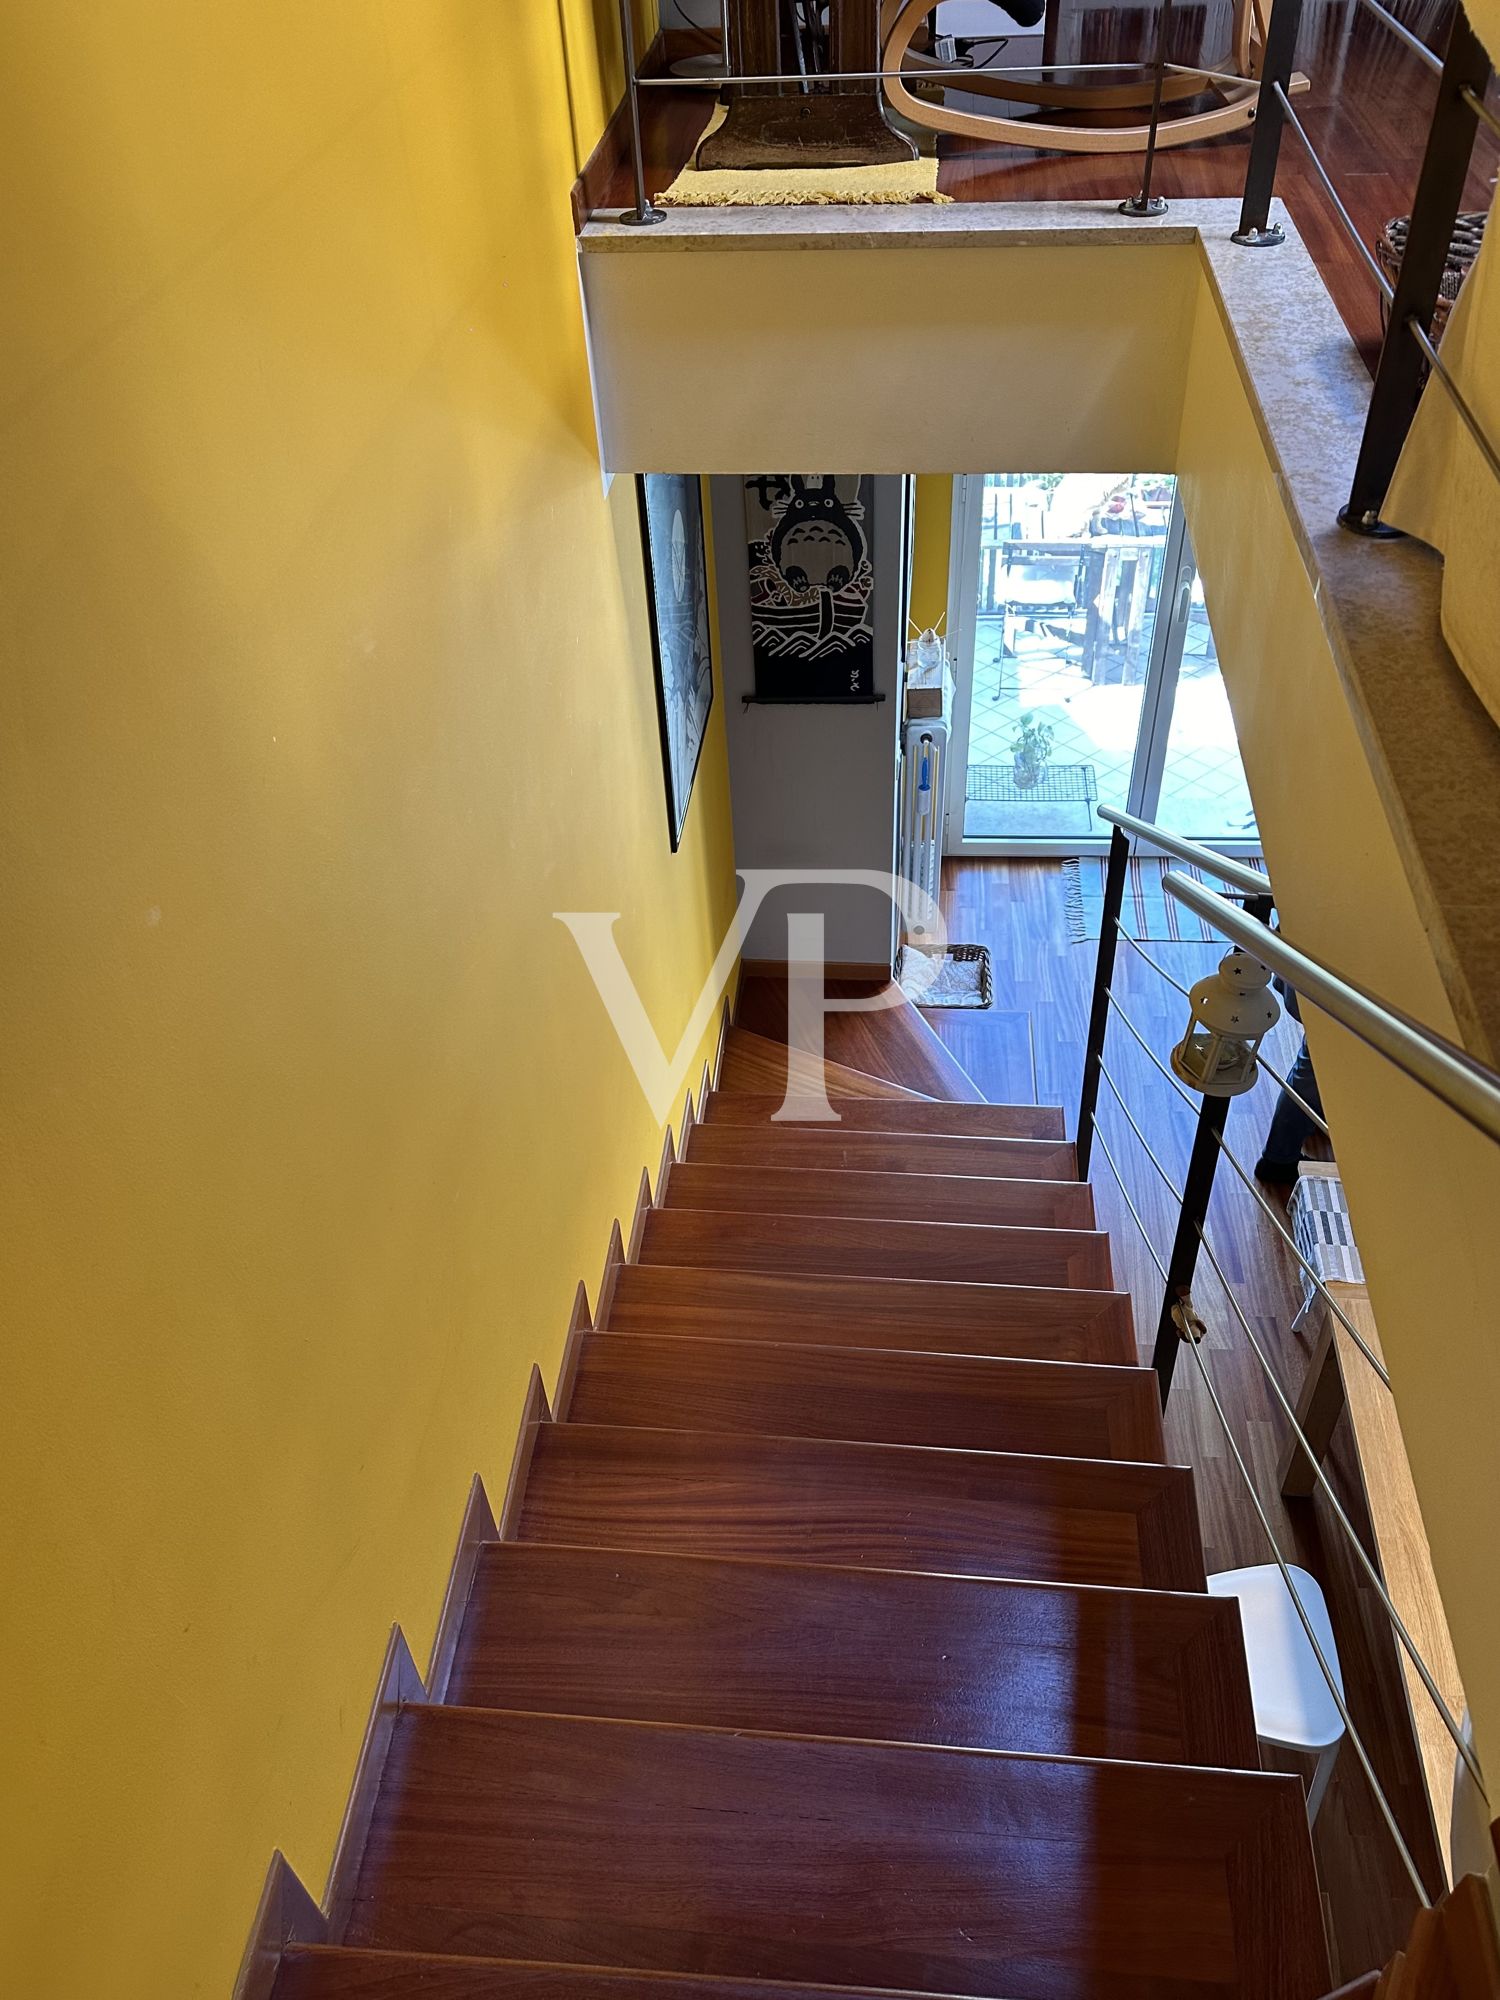 Fantastic three-room apartment on two levels with two bathrooms, balconies, basement and double garage.